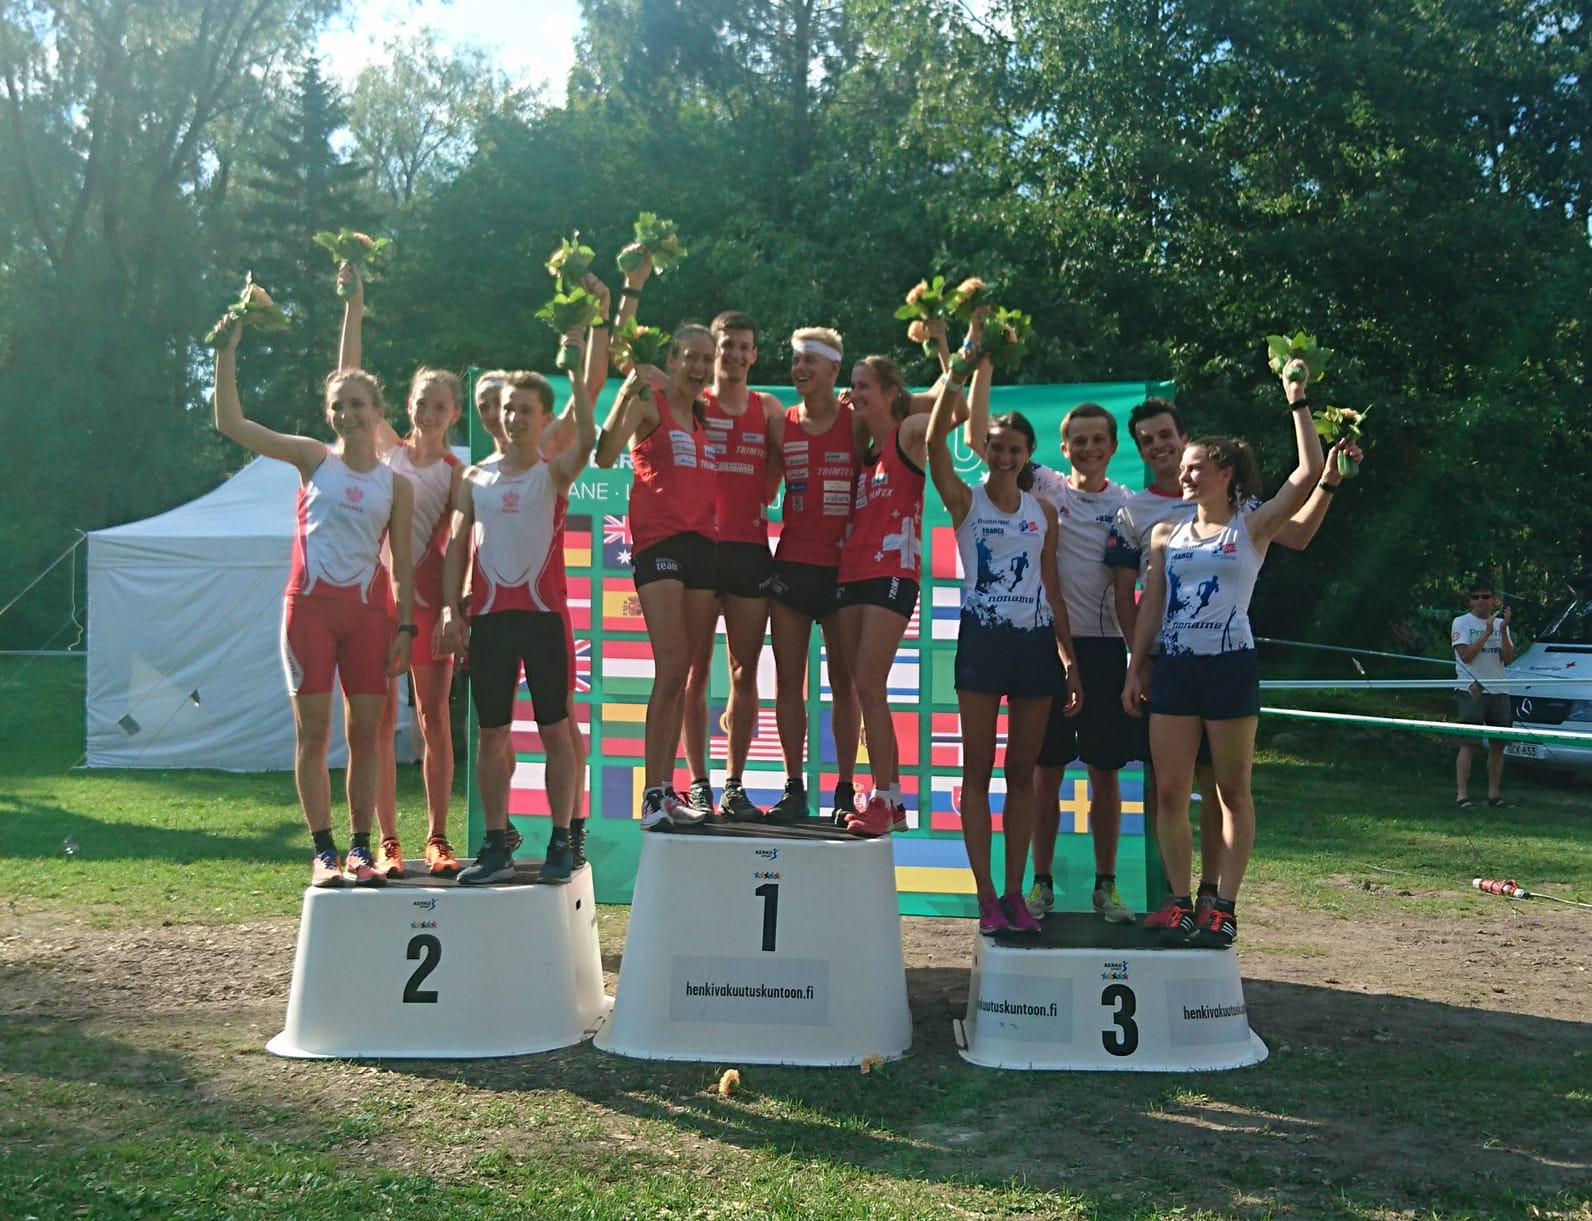 Switzerland earned sprint relay gold on the first day of action at the World University Orienteering Championships ©Facebook/WUC Orienteering 2018